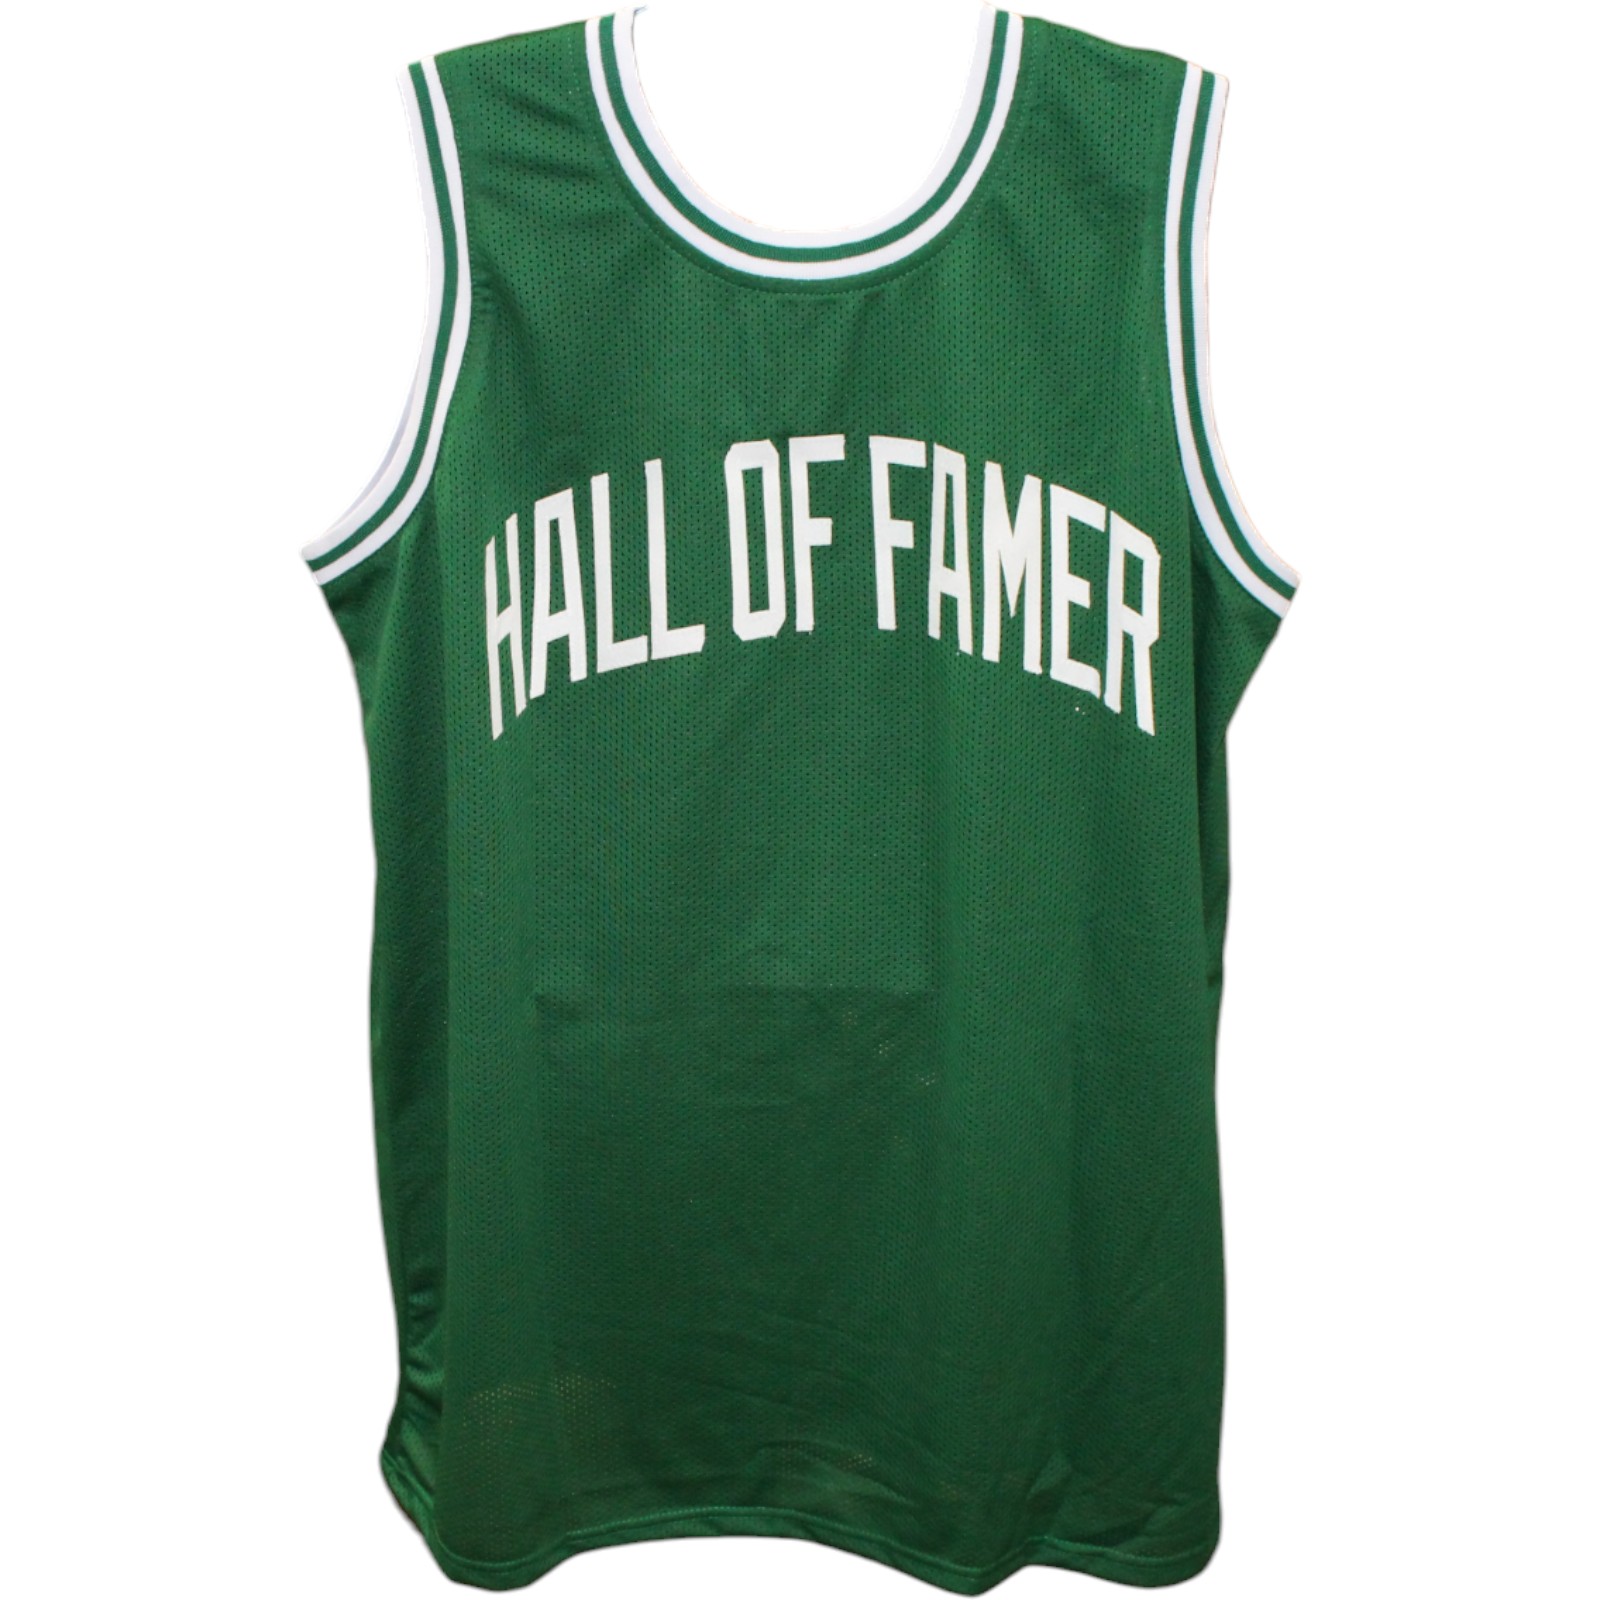 Nate Archibald Autographed/Signed Pro Style Green Jersey HOF TRI